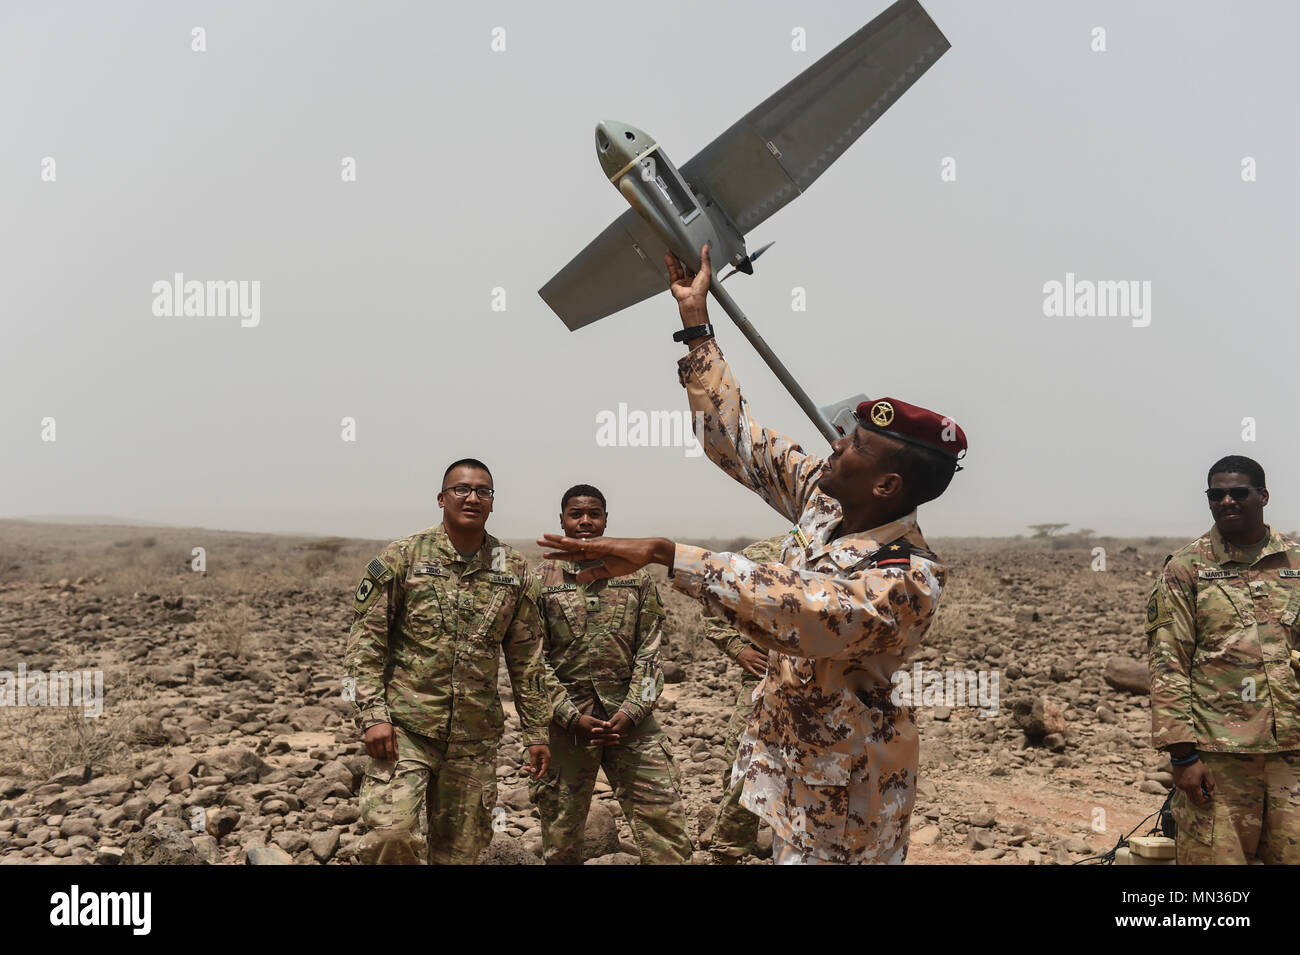 U.S. Army Soldiers assigned to the 1st Battalion, 153rd Infantry Regiment Task Force Warrior, an associated unit of Combined Joint Task Force - Horn of Africa, disassemble a Raven RQ-11 system during a demonstration in an airfield in southern Djibouti, Aug. 21, 2017. The demonstration was an effort to familiarize Djiboutian Armed Forces members with the unmanned aerial vehicle system, clear up confusion about the Raven RQ-11 and other RPAs, and show the safe operation of the Raven. (U.S. Air Force photo by Staff Sgt. Eboni Prince) Stock Photo